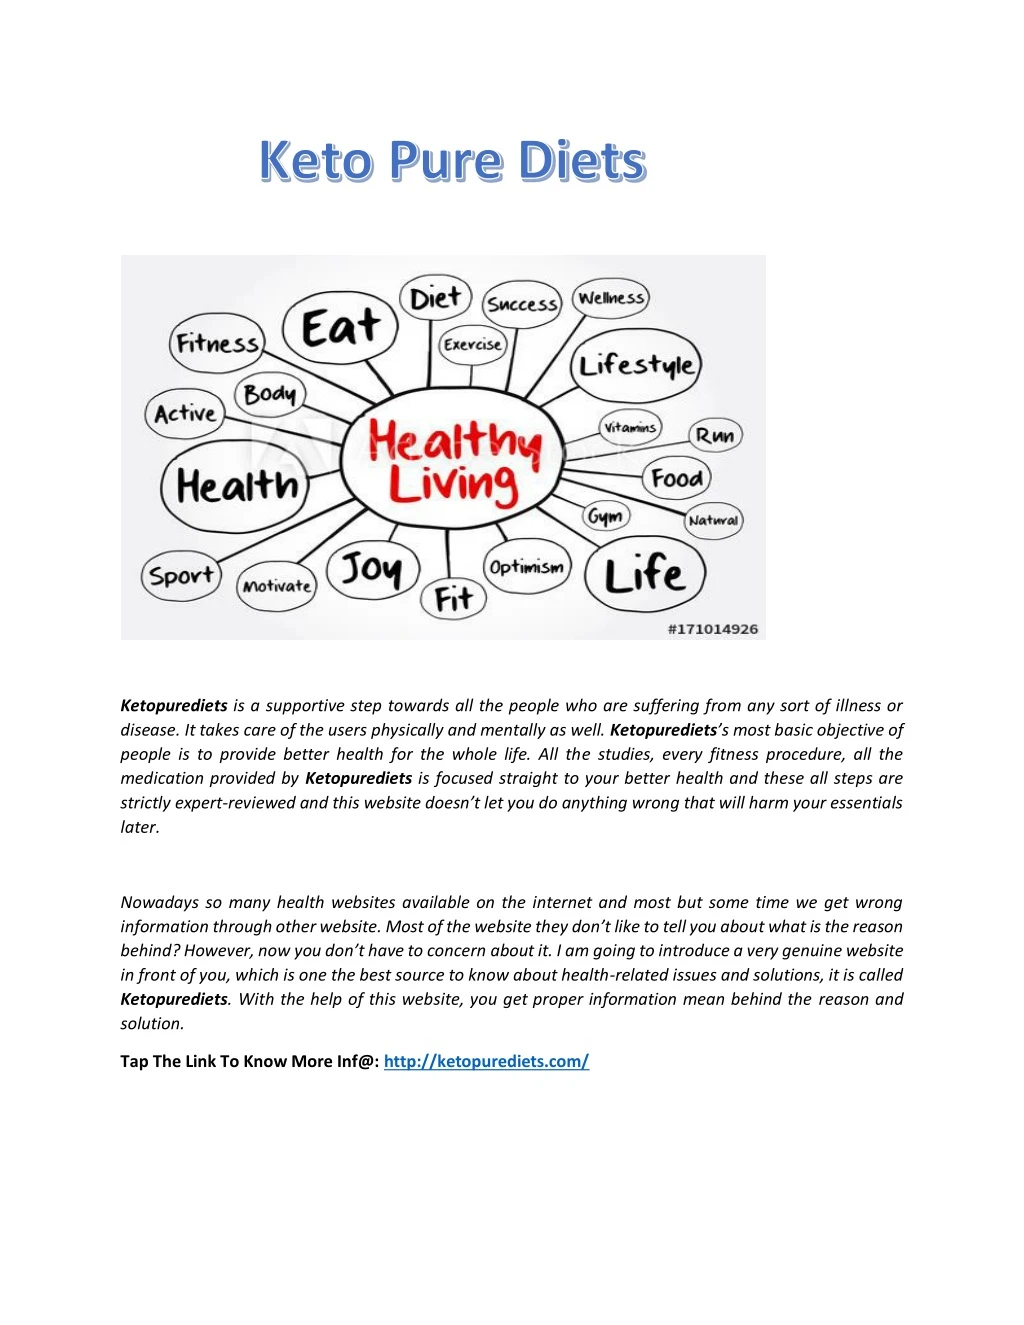 ketopurediets is a supportive step towards